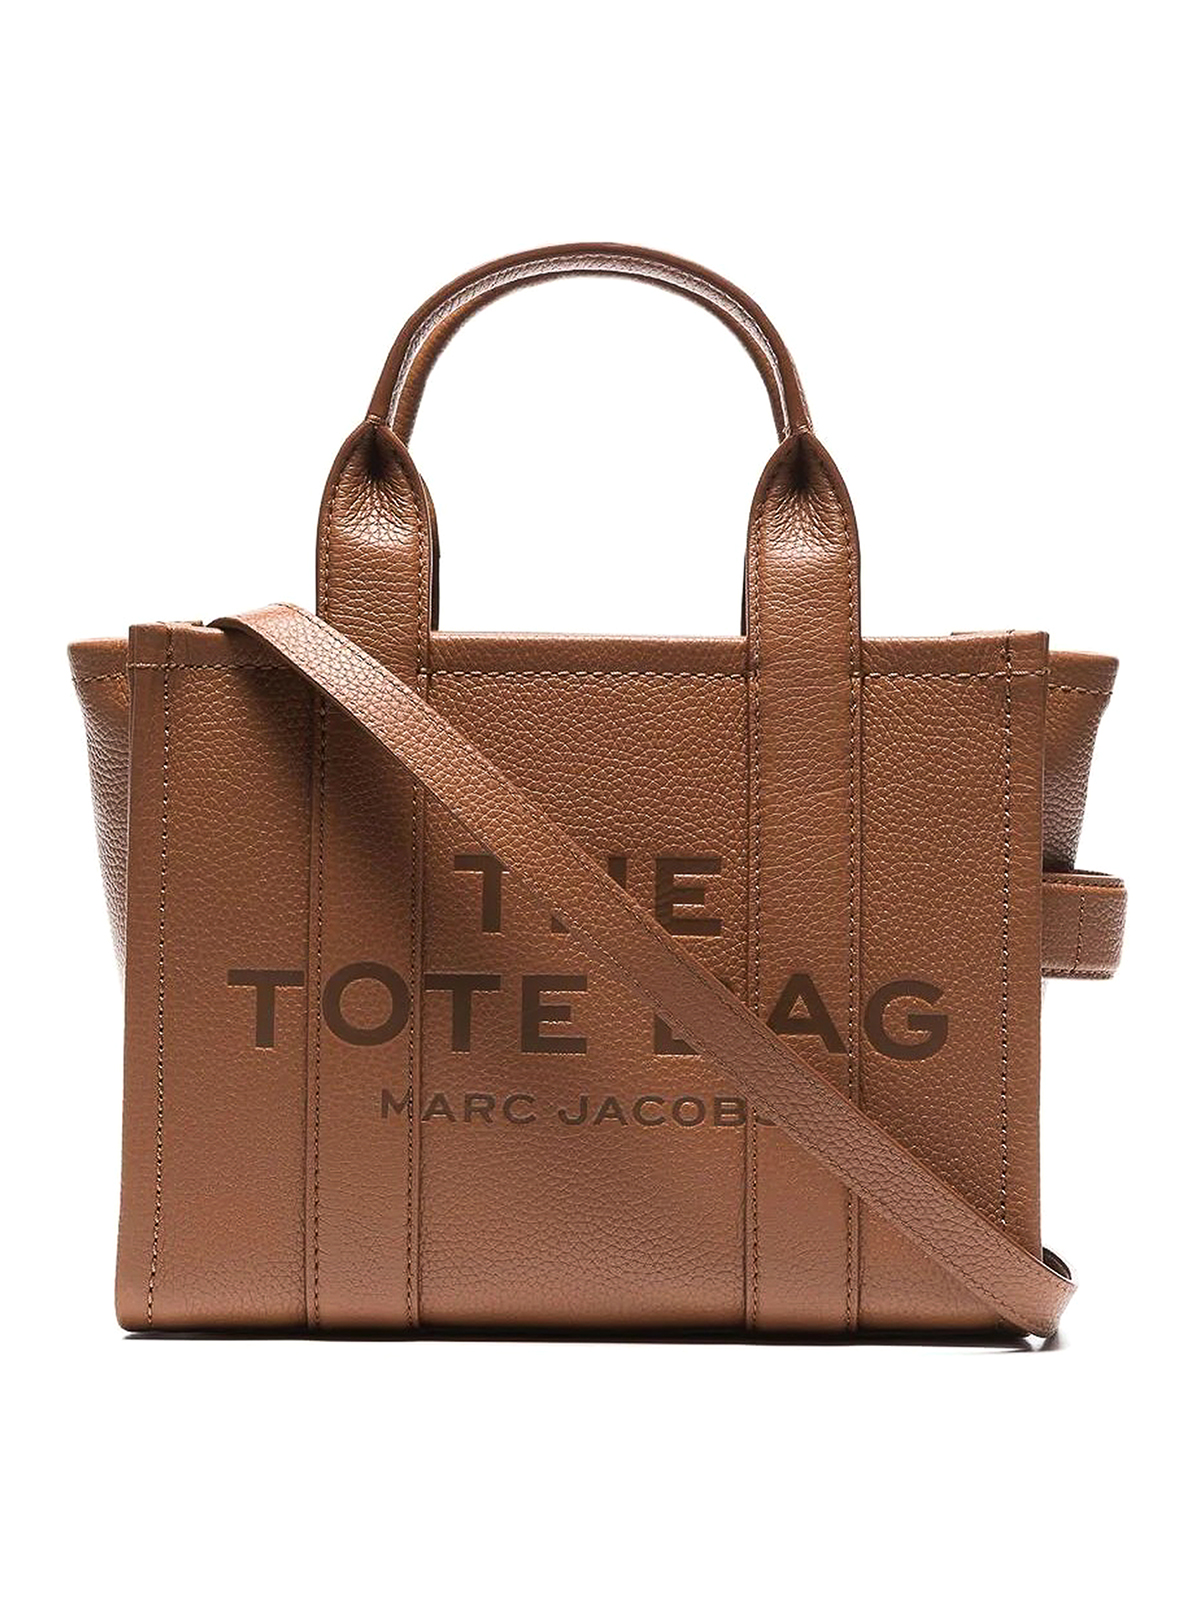 Marc Jacobs The Tote Mini Bag In Brown